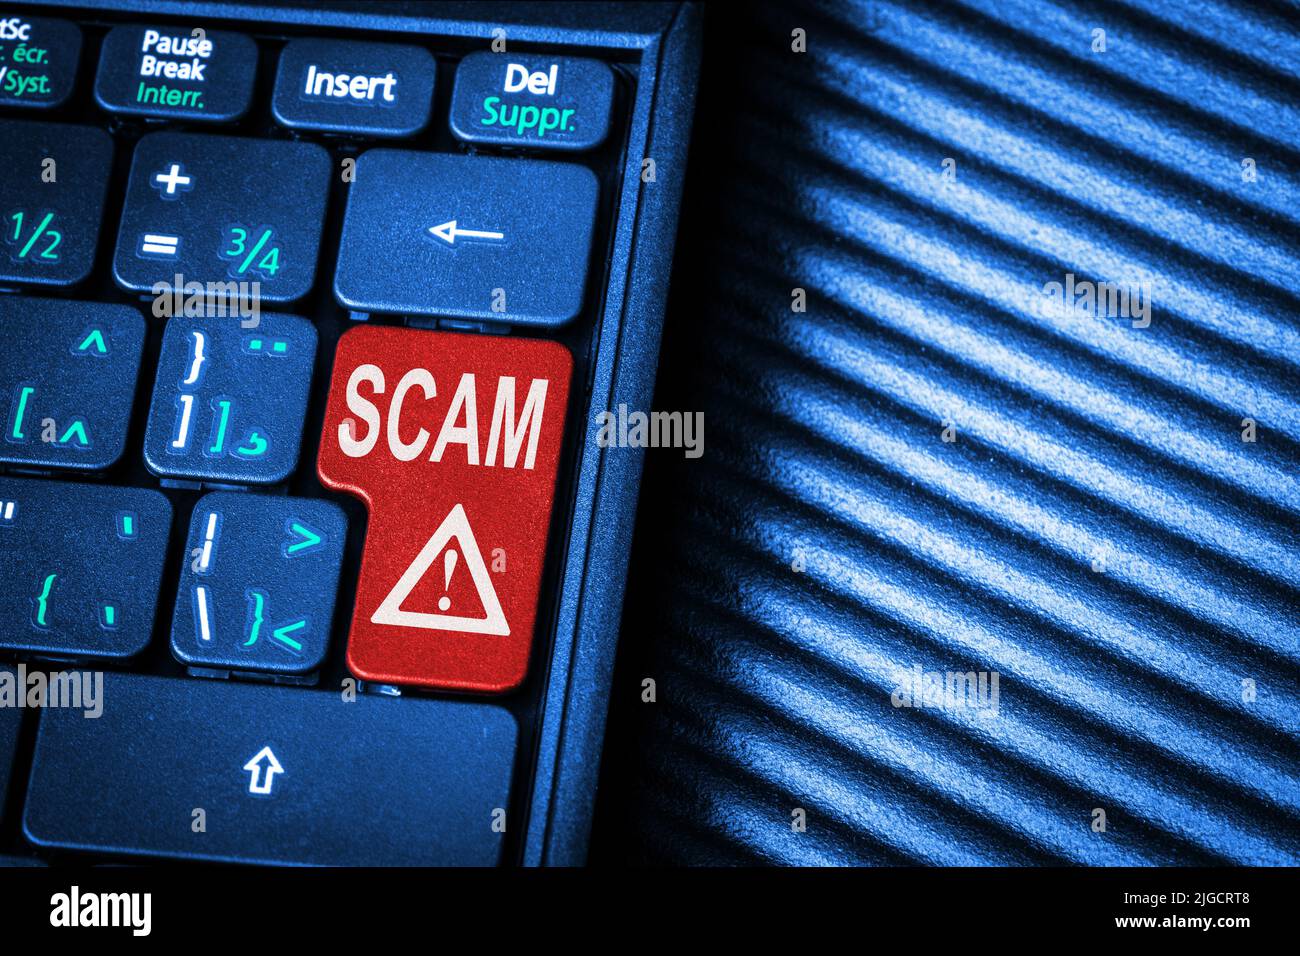 Keyboard showing a red key and the message scam alert with copy space. Concept of high-tech scam and Internet danger with the touch of a button. Stock Photo